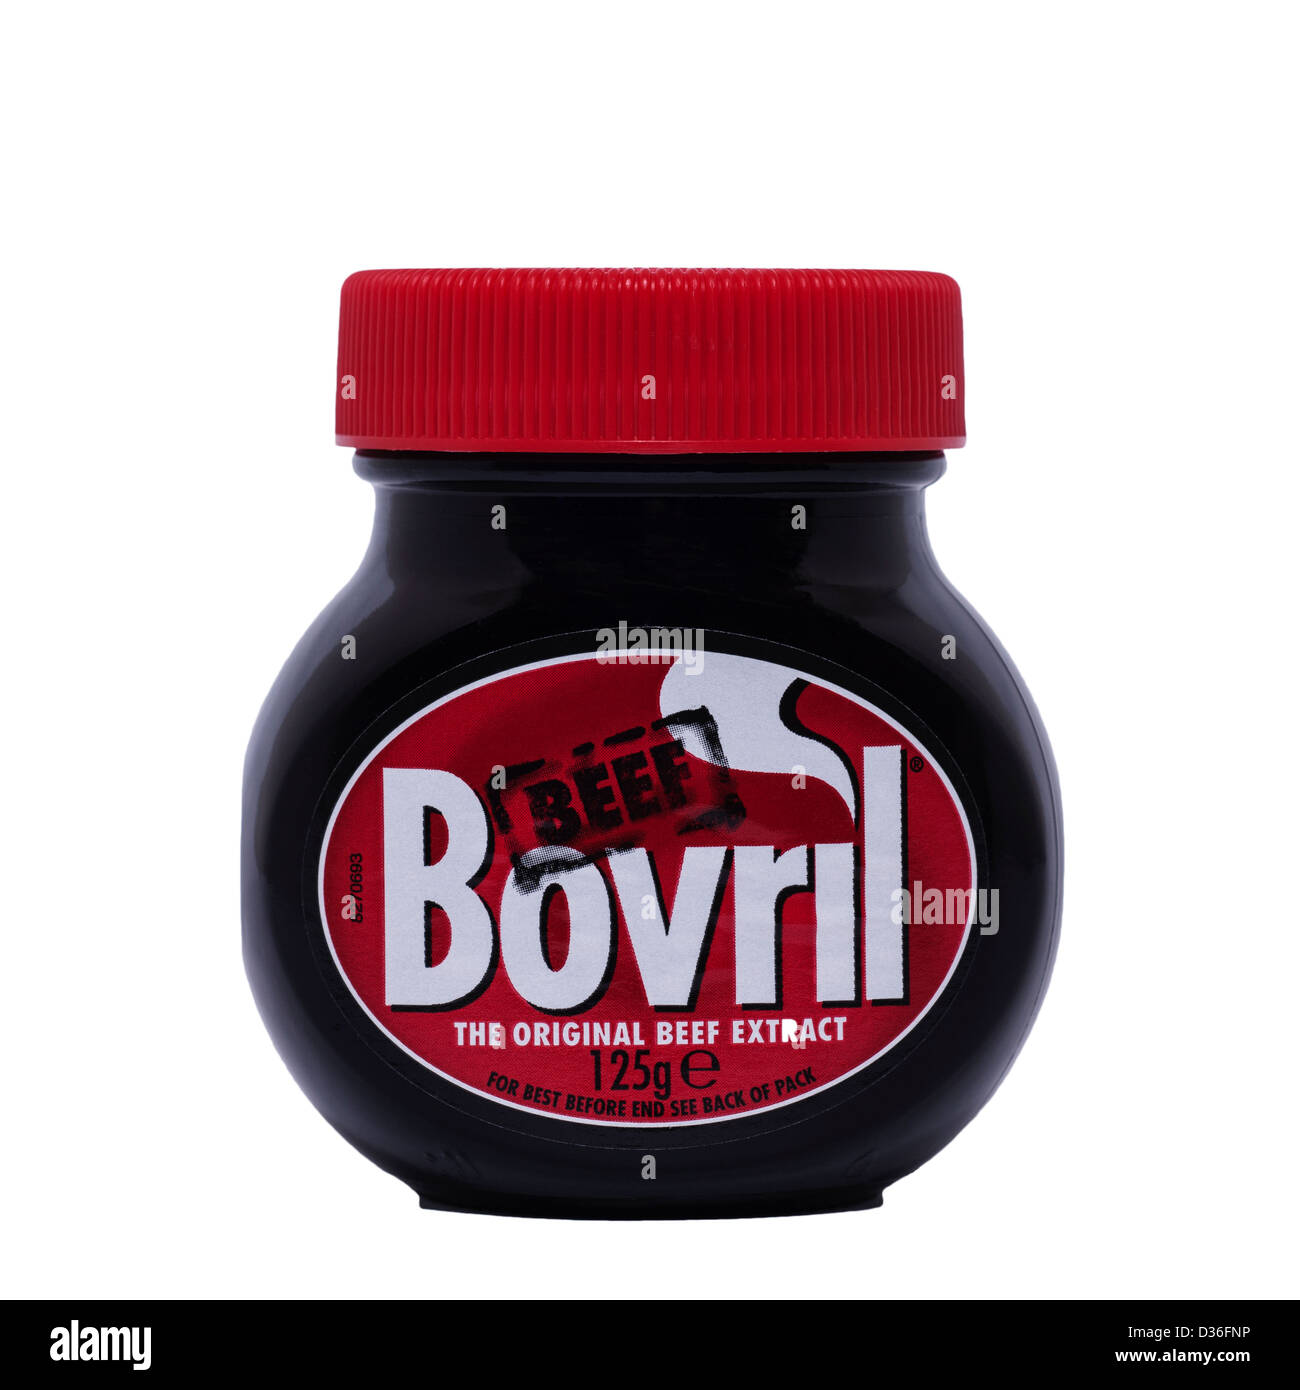 A jar of Beef Bovril original beef extract on a white background Stock Photo